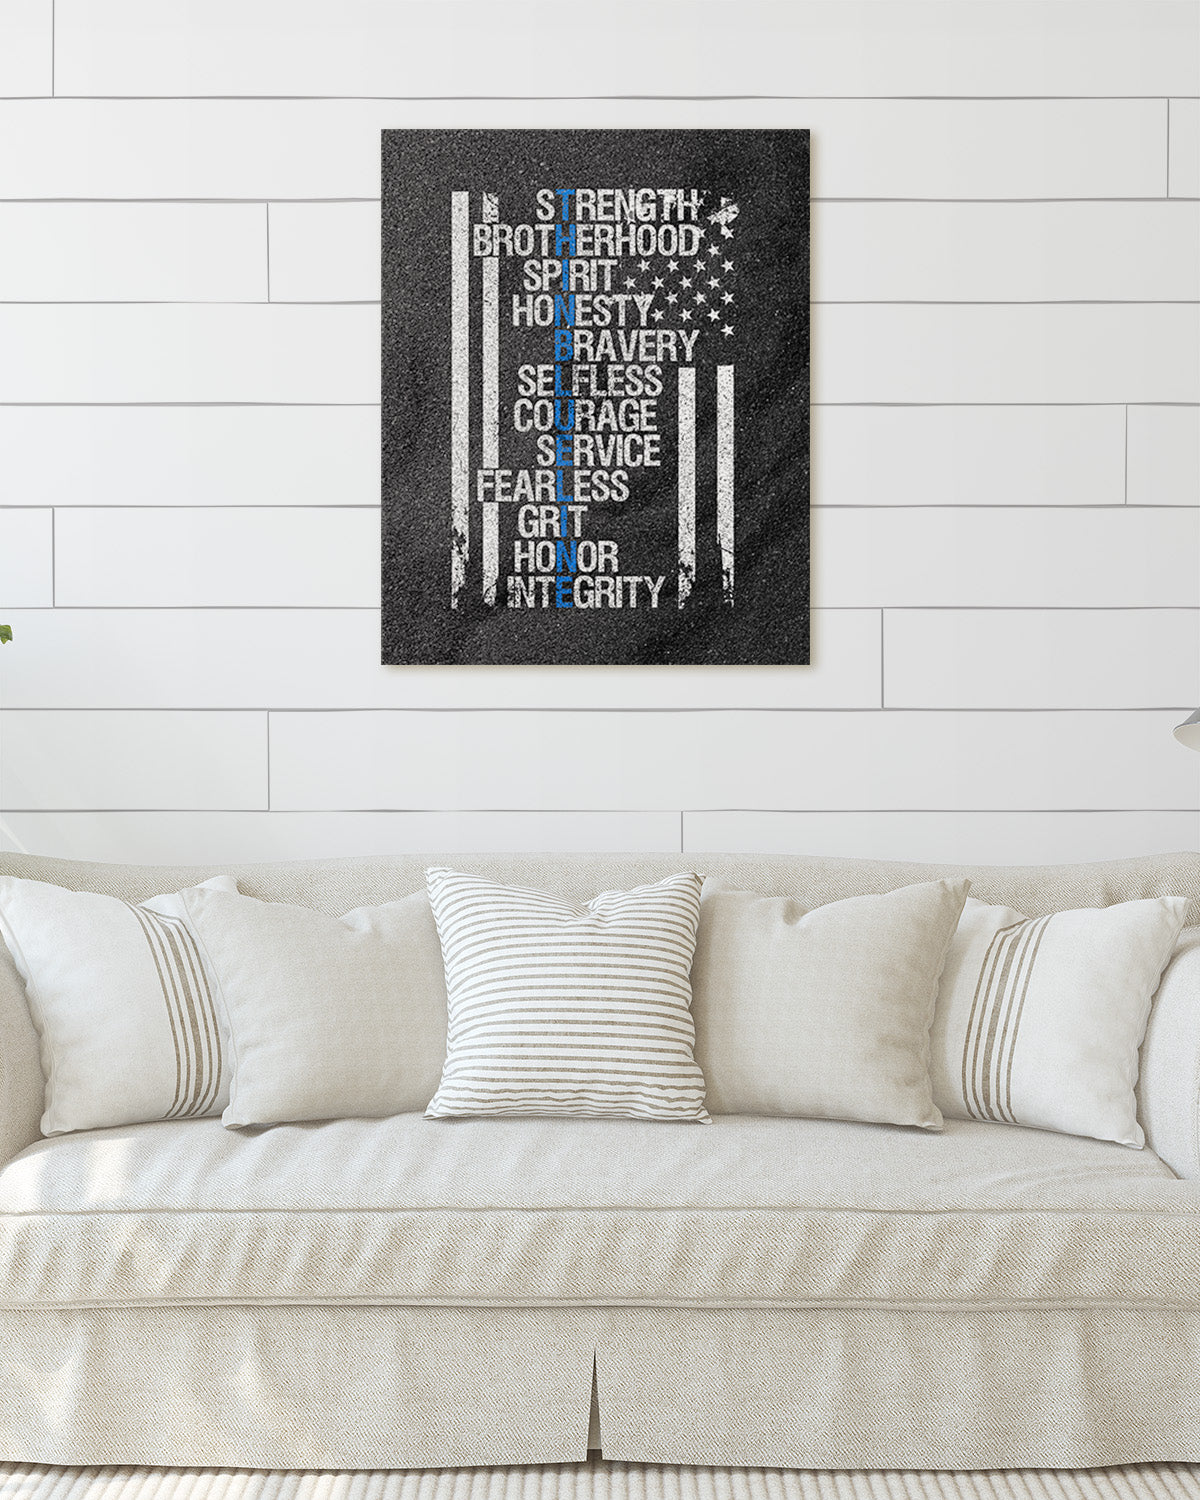 Thin Blue Line Wall Art Print - Law Enforcement Prints - Police Officer Gifts - Police Academy Graduation - Police Officer Wall Decor - Law Enforcement Appreciation Gift